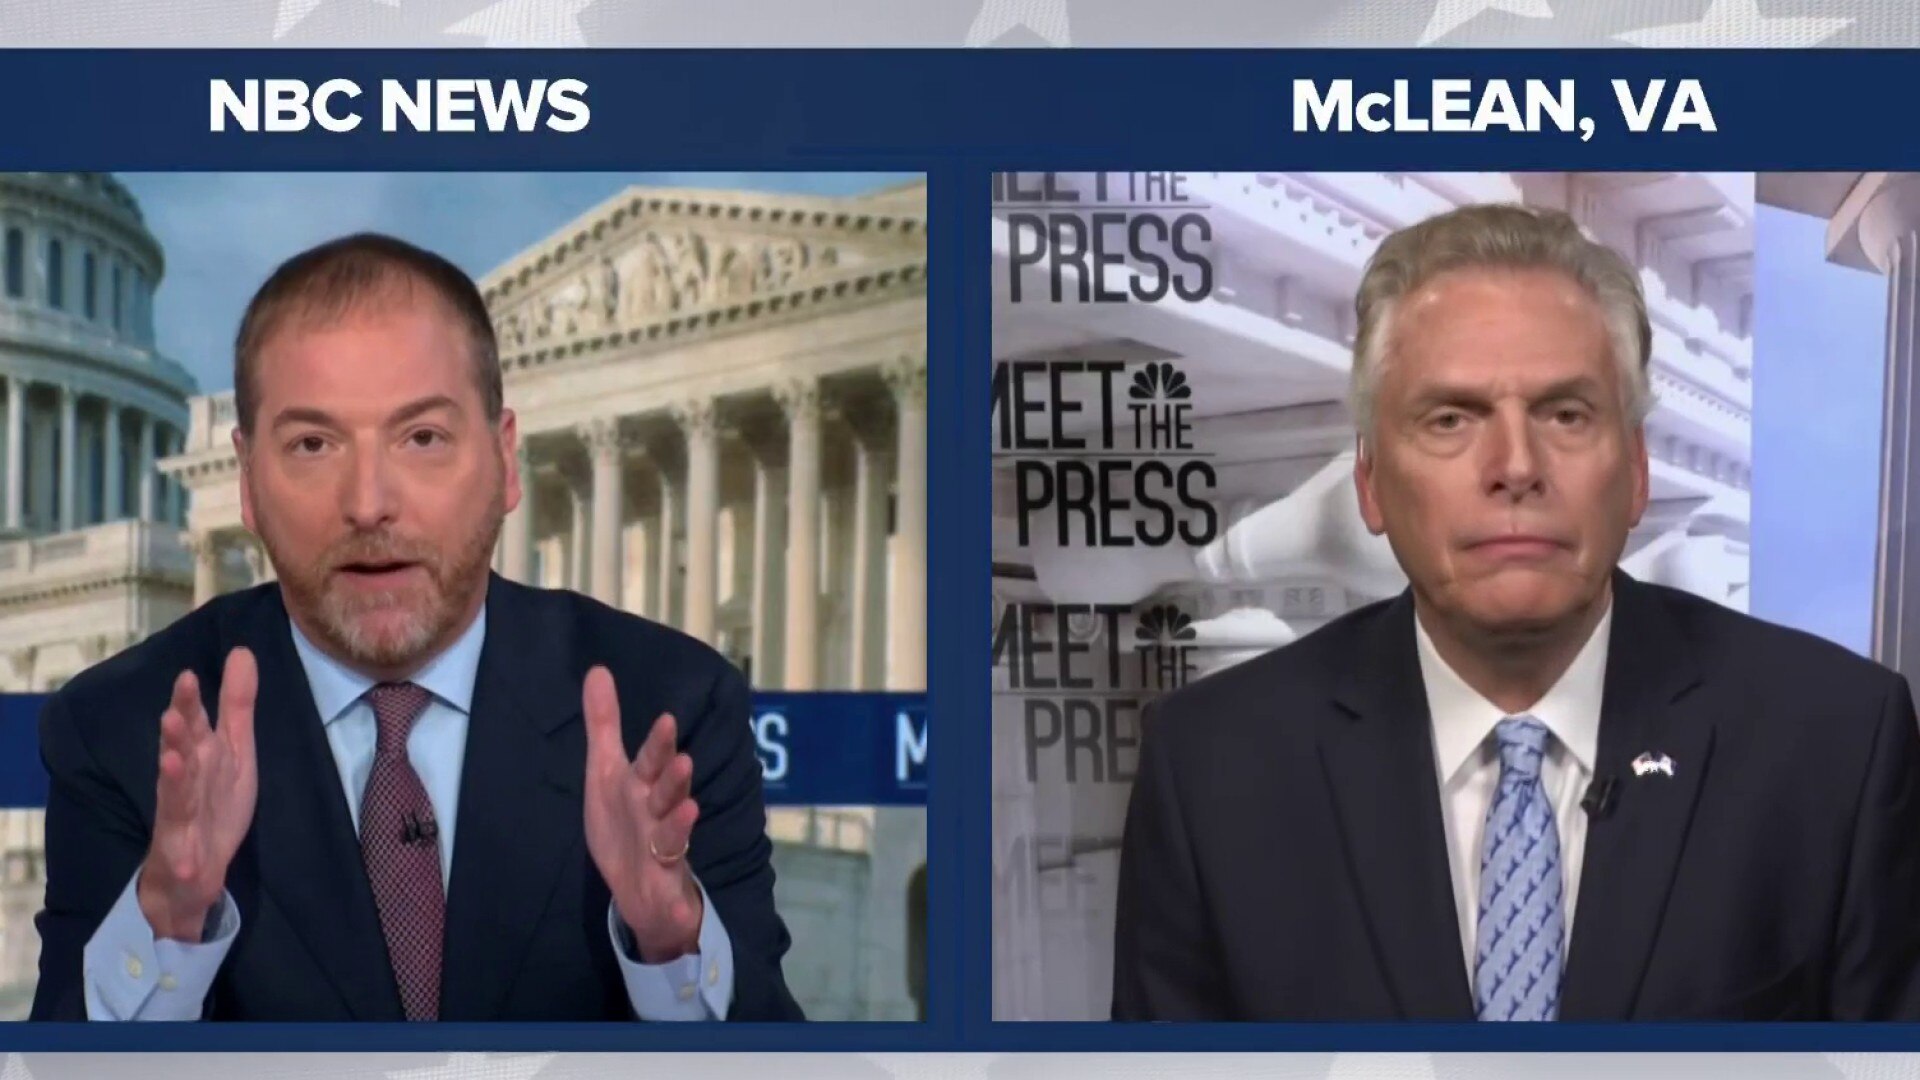 Watch Meet the Press Excerpt: McAuliffe: Youngkin is 'ending his campaign  on a racist dog whistle' - NBC.com